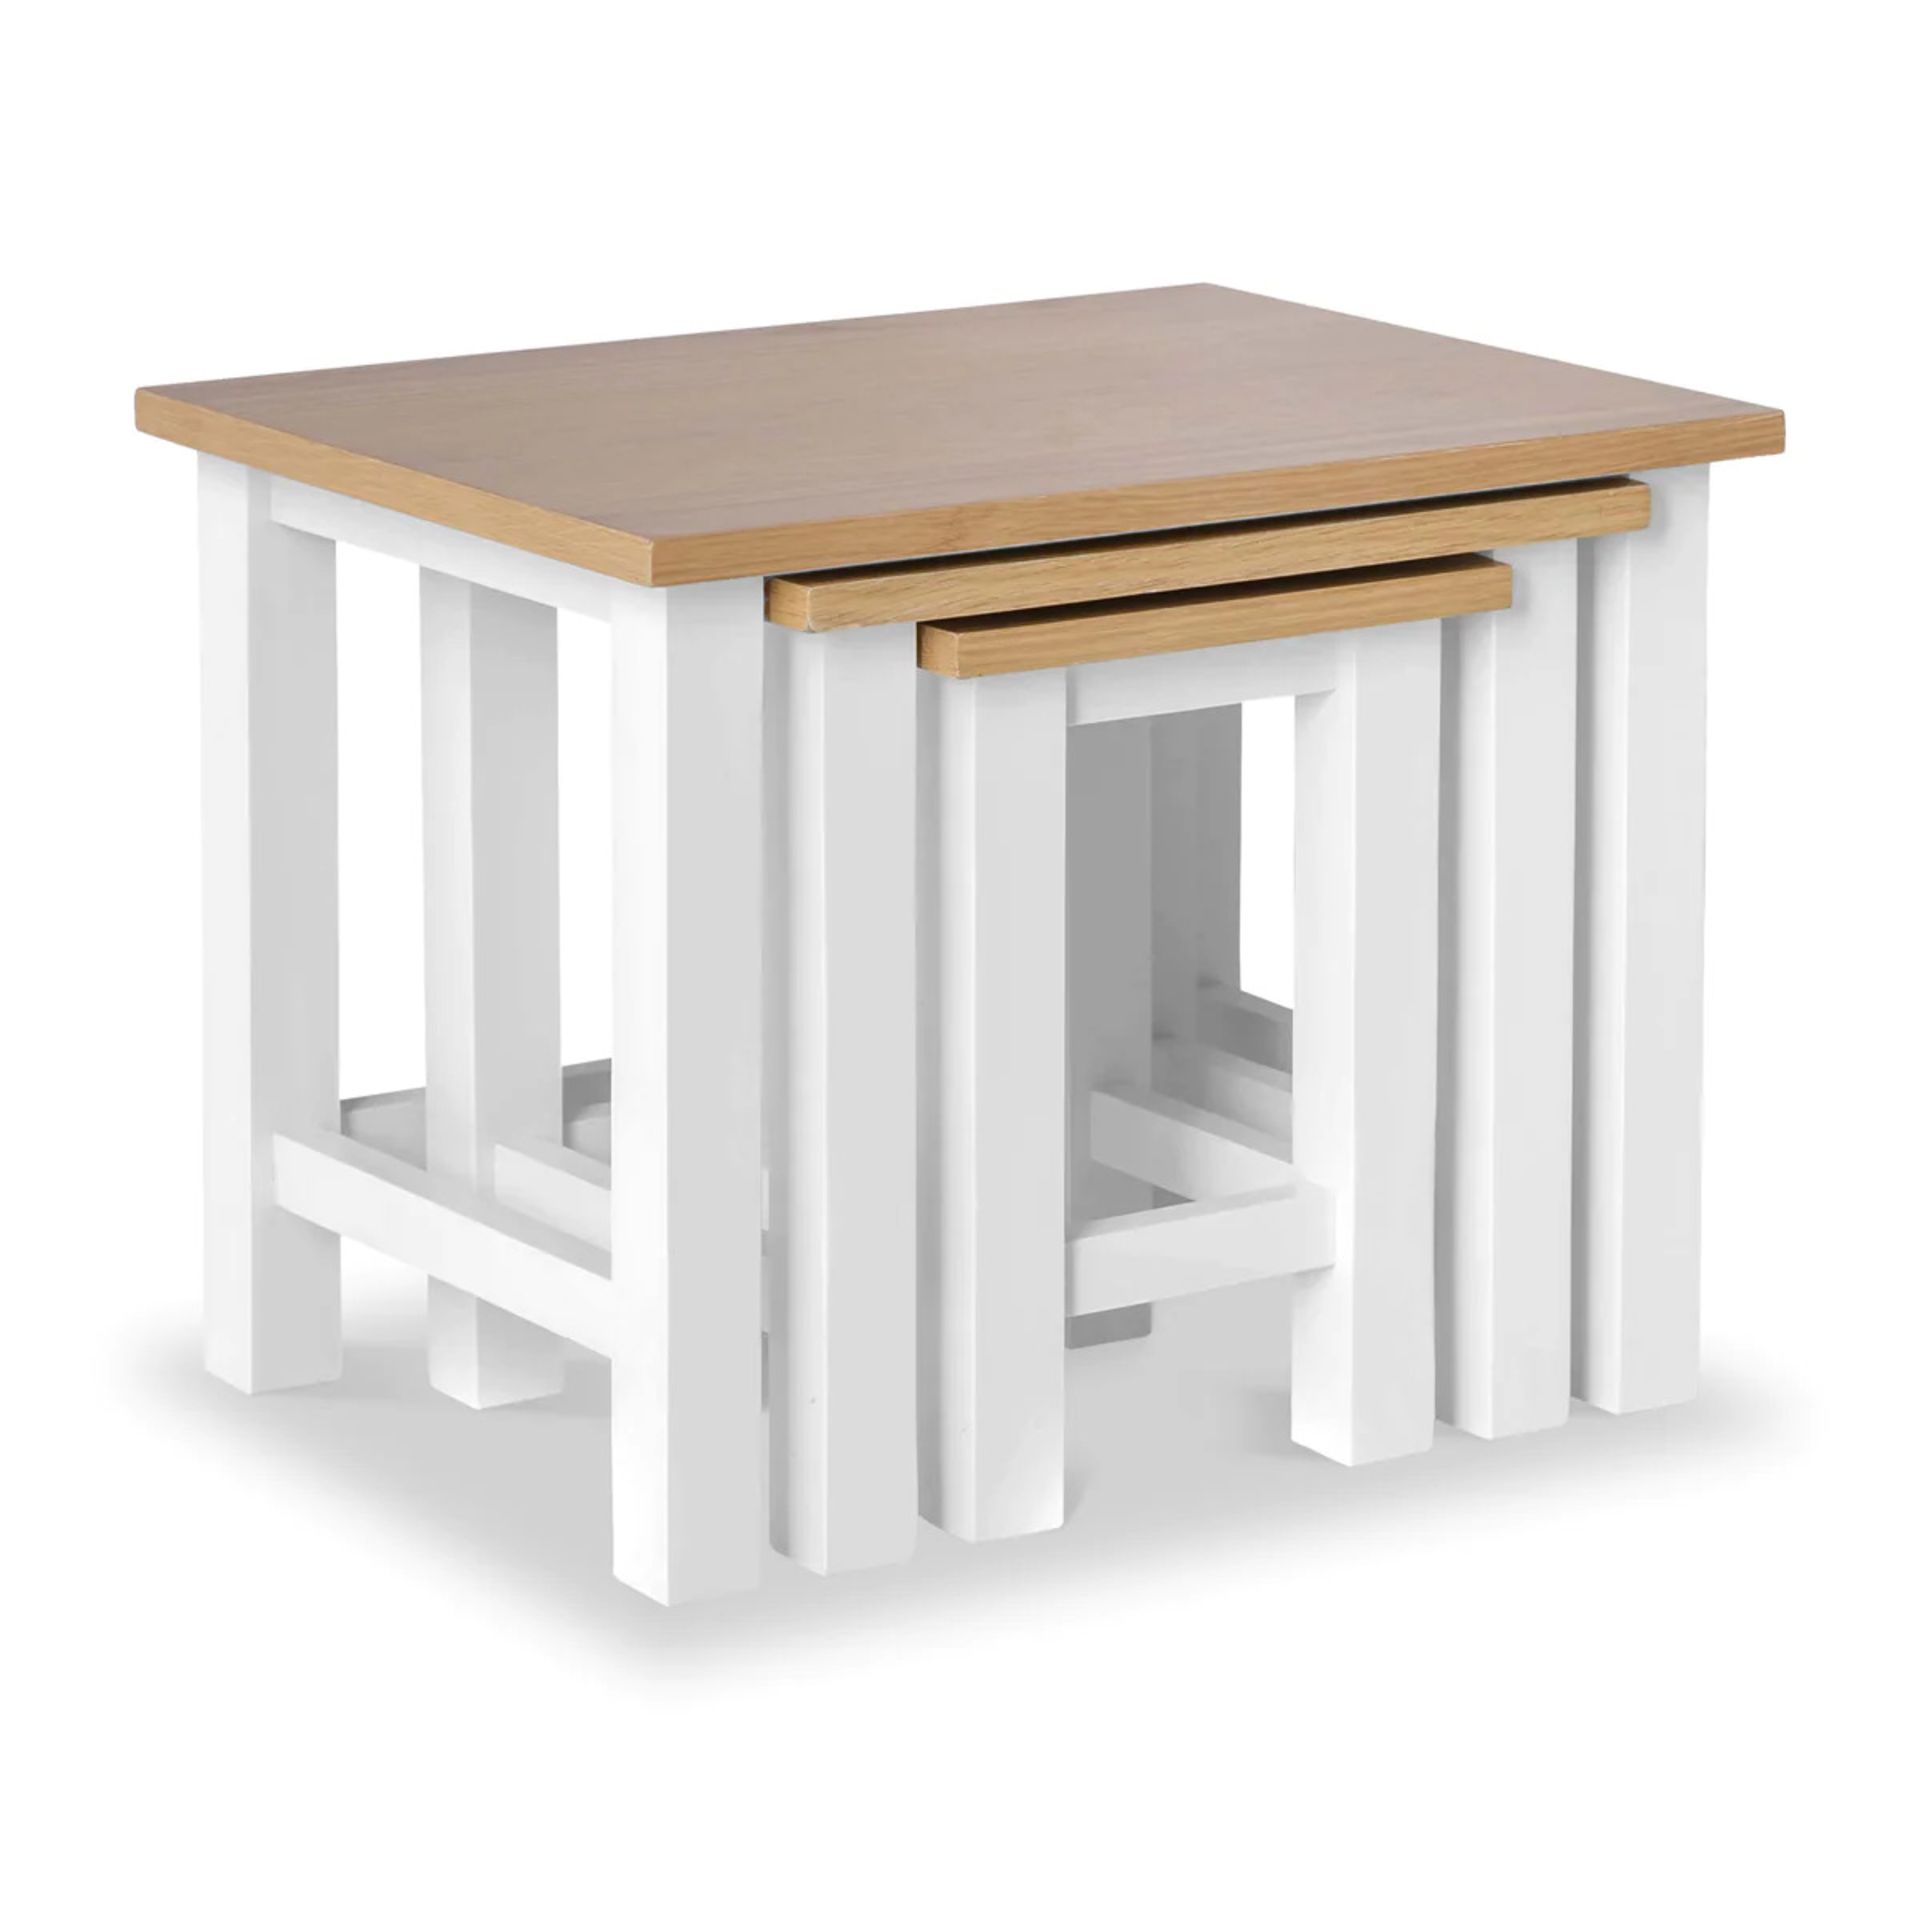 Farrow Nest of Tables. RRP £209.99. (4847-P40) This nest of three tables is bound to be a useful